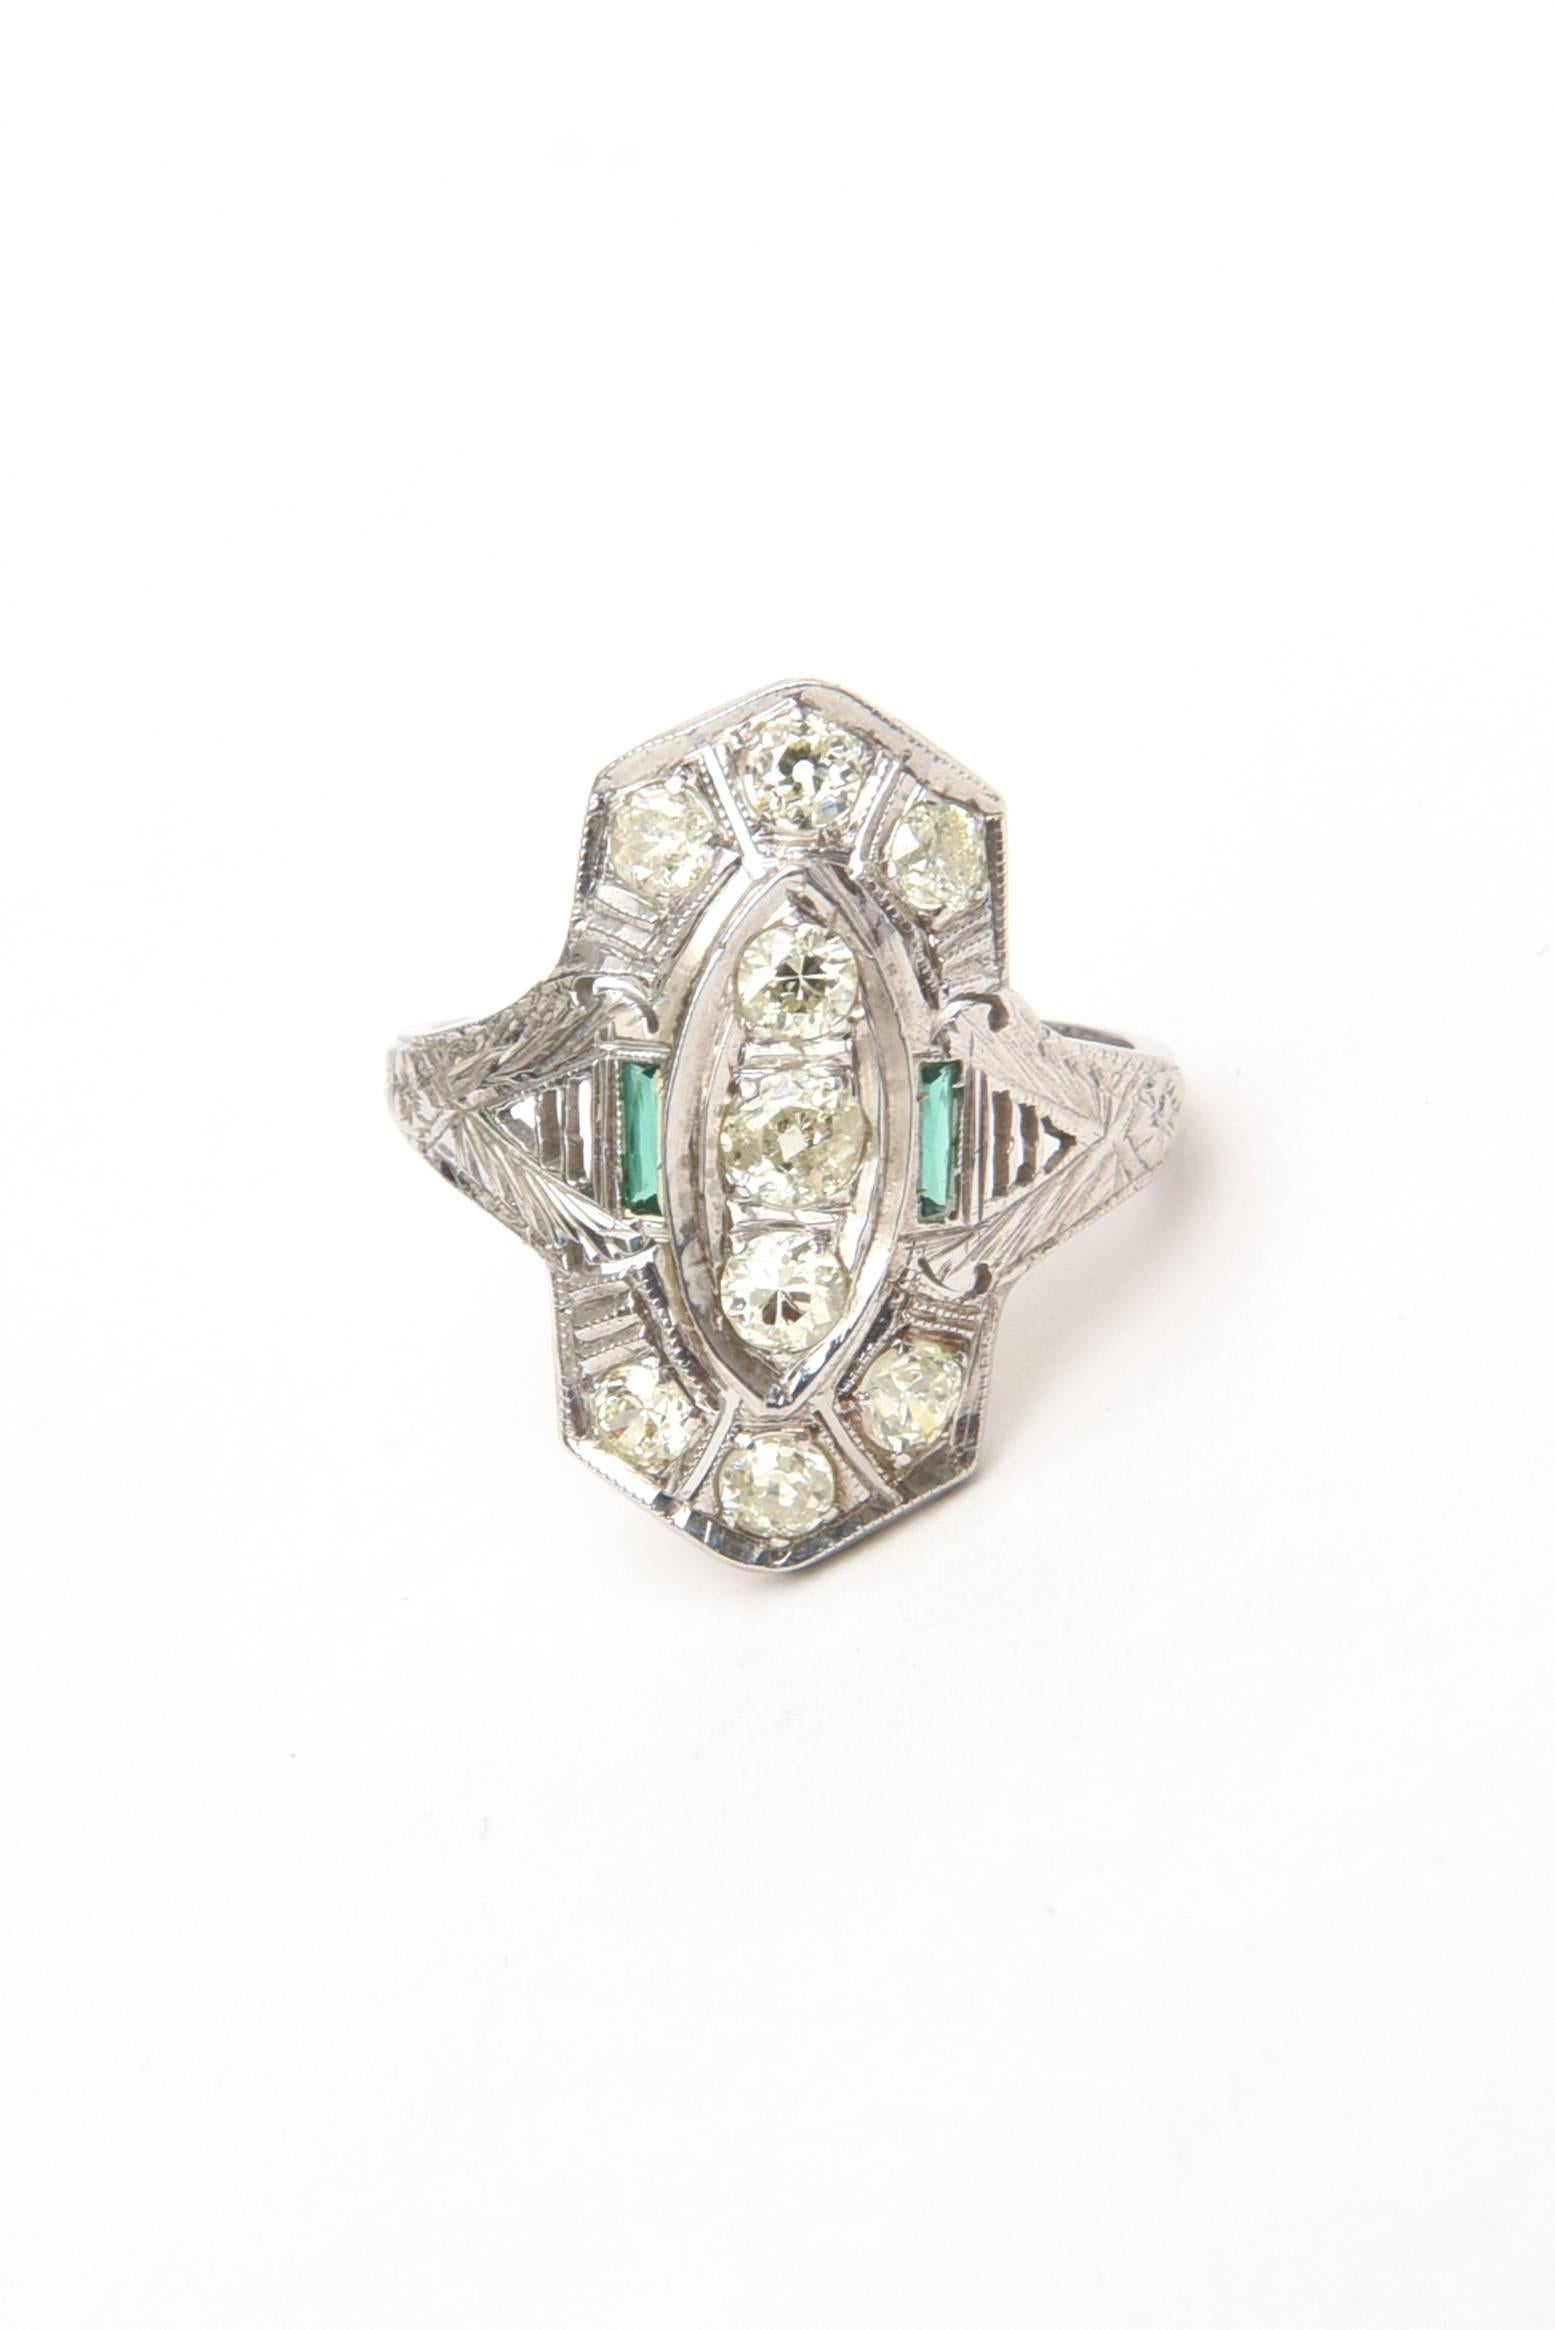 This lovely art deco period 18 karat white gold ring has 9 round old mine cut diamonds of .45 carat total weight in diamonds.
The two green green stones are glass and look to resemble emeralds.
it is stamped 18K.
Is is 2.6 DWT or penny weight.
The